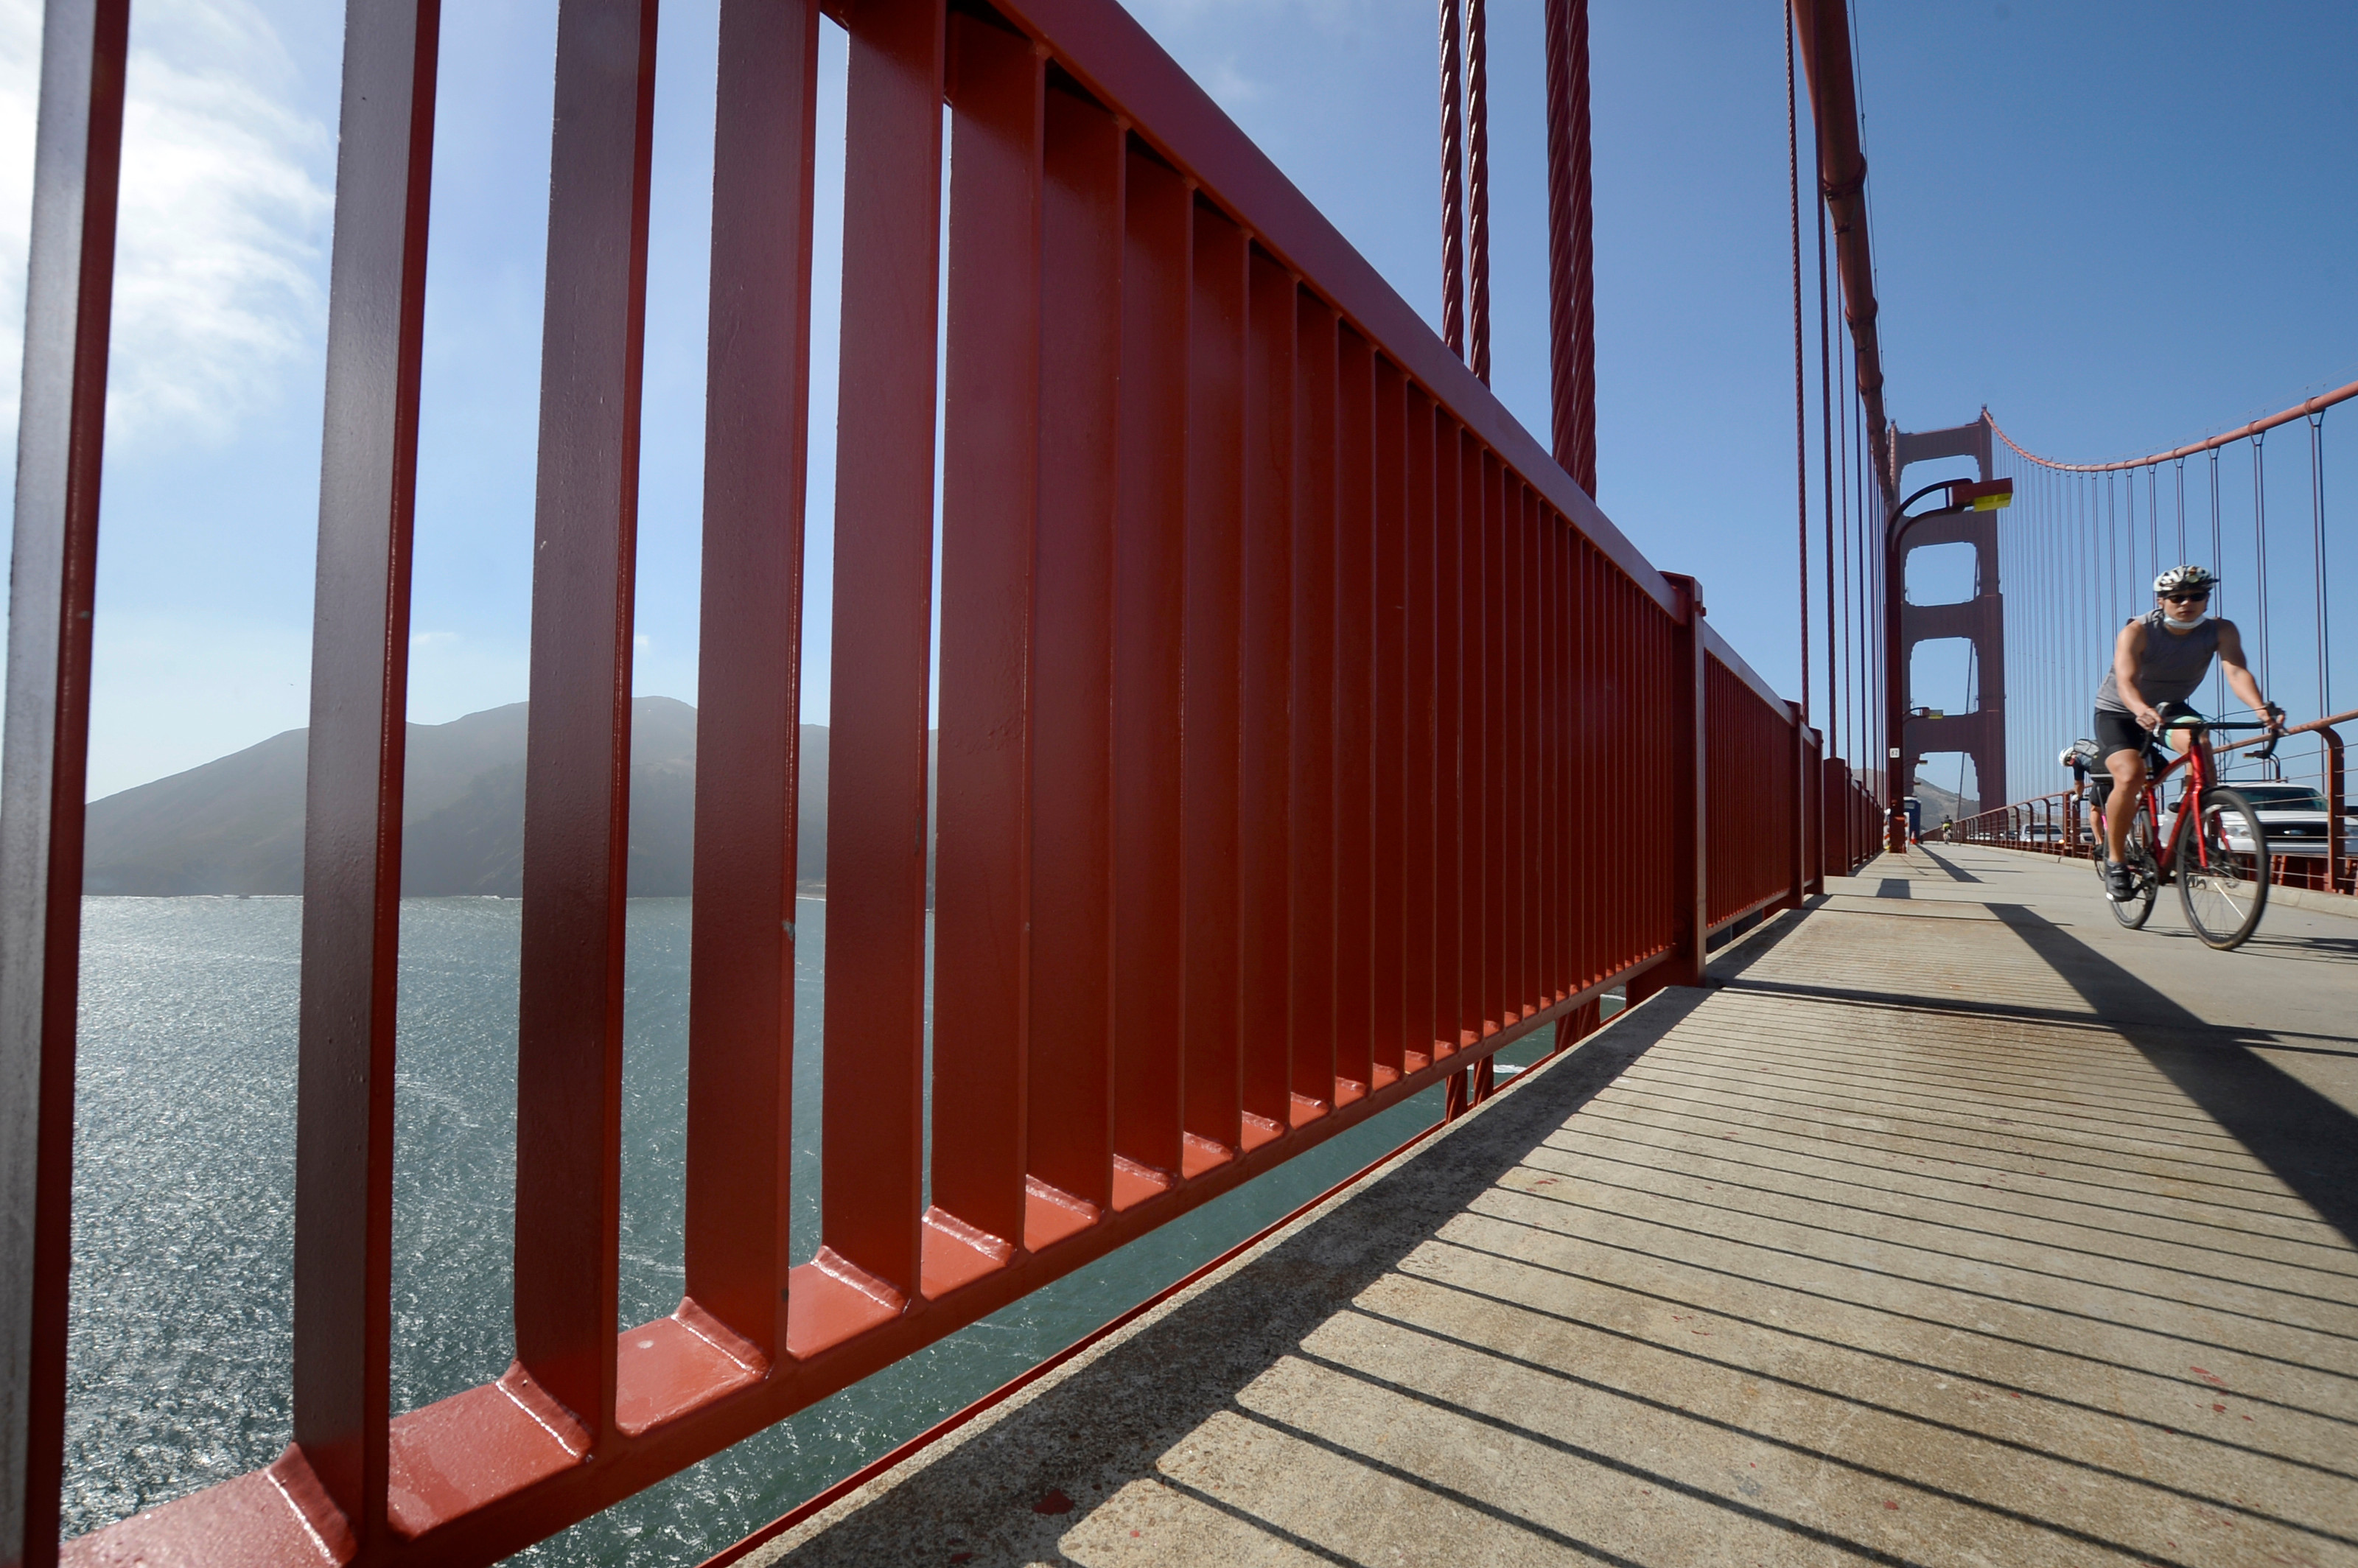 New Golden Gate Bridge Barrier Draws Sighs of Relief - The New York Times